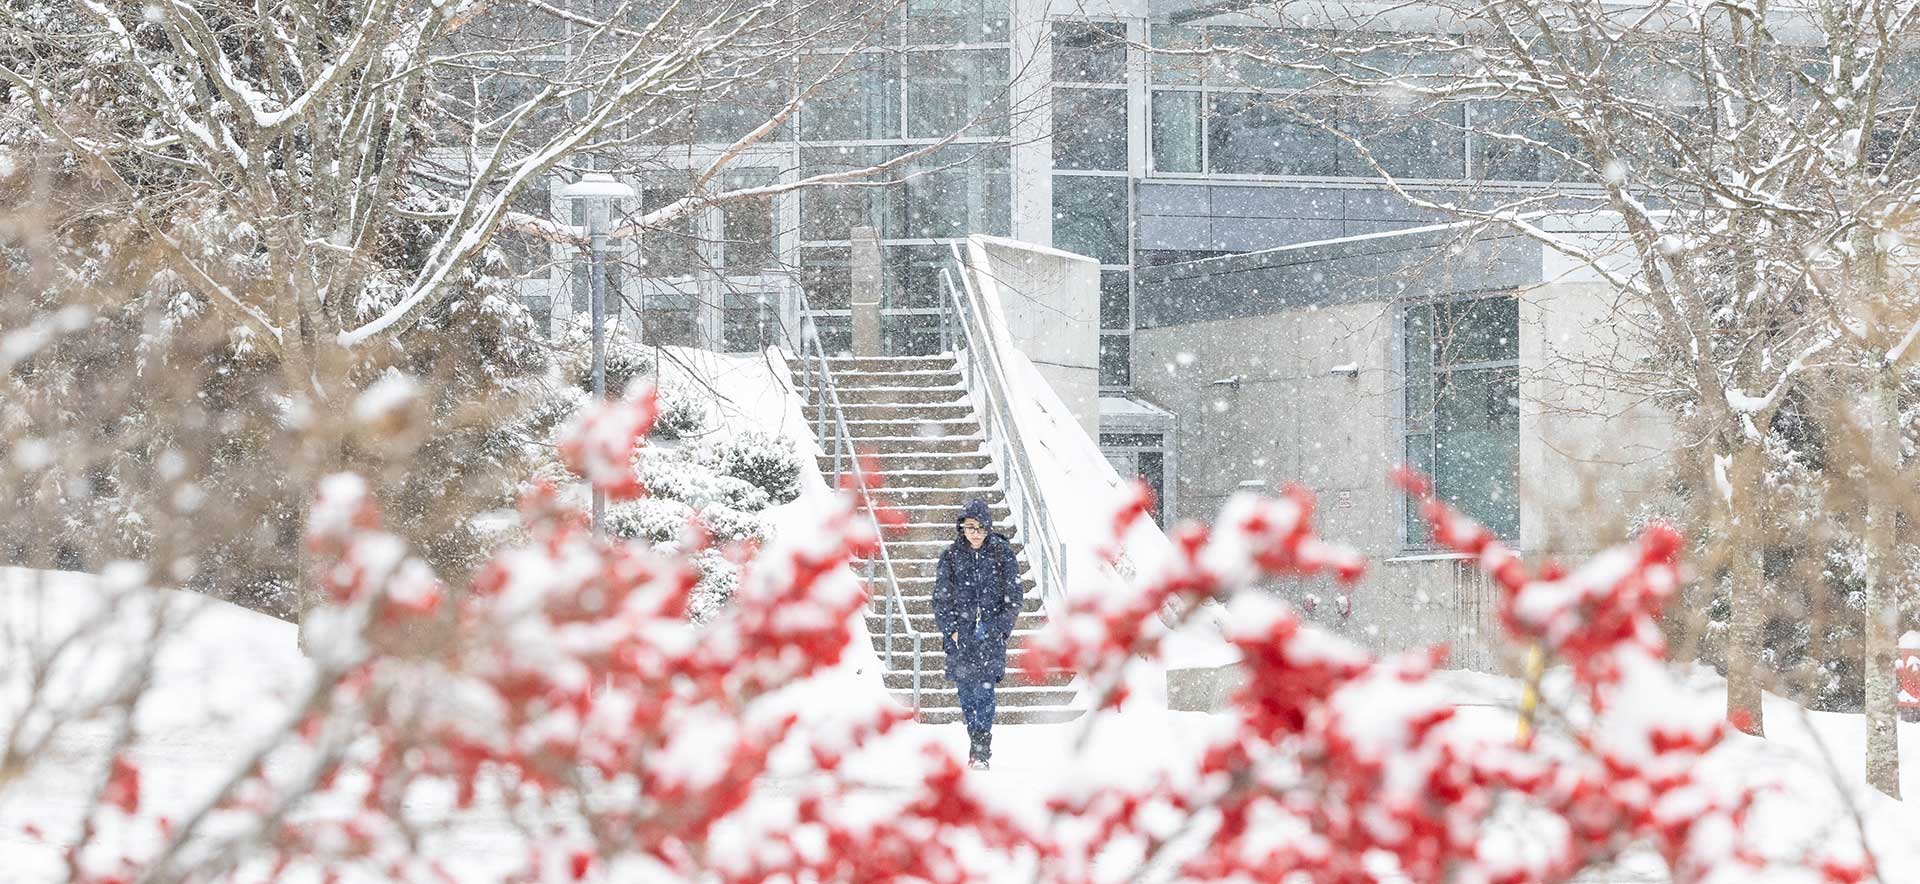 A student walking through falling snow, as seen looking through a bush with red berries